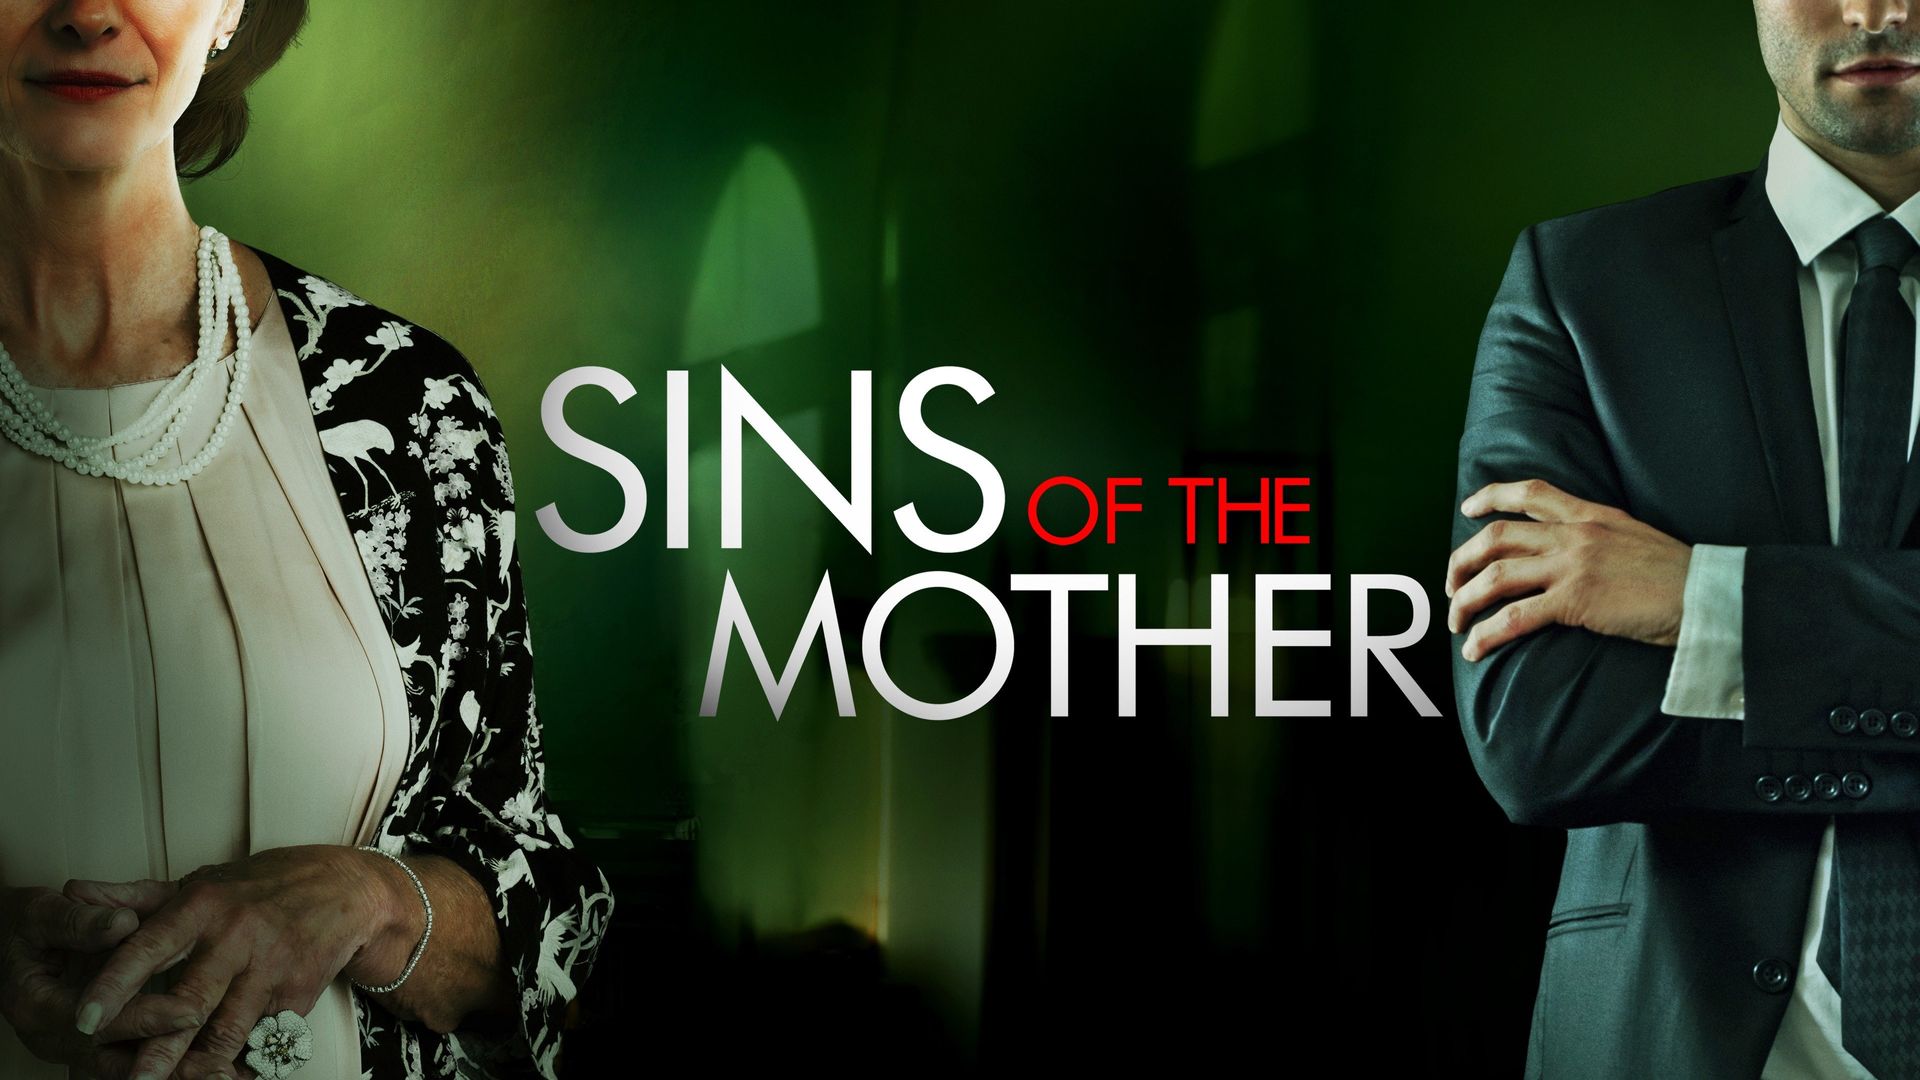 Sins of the Mother Backdrop